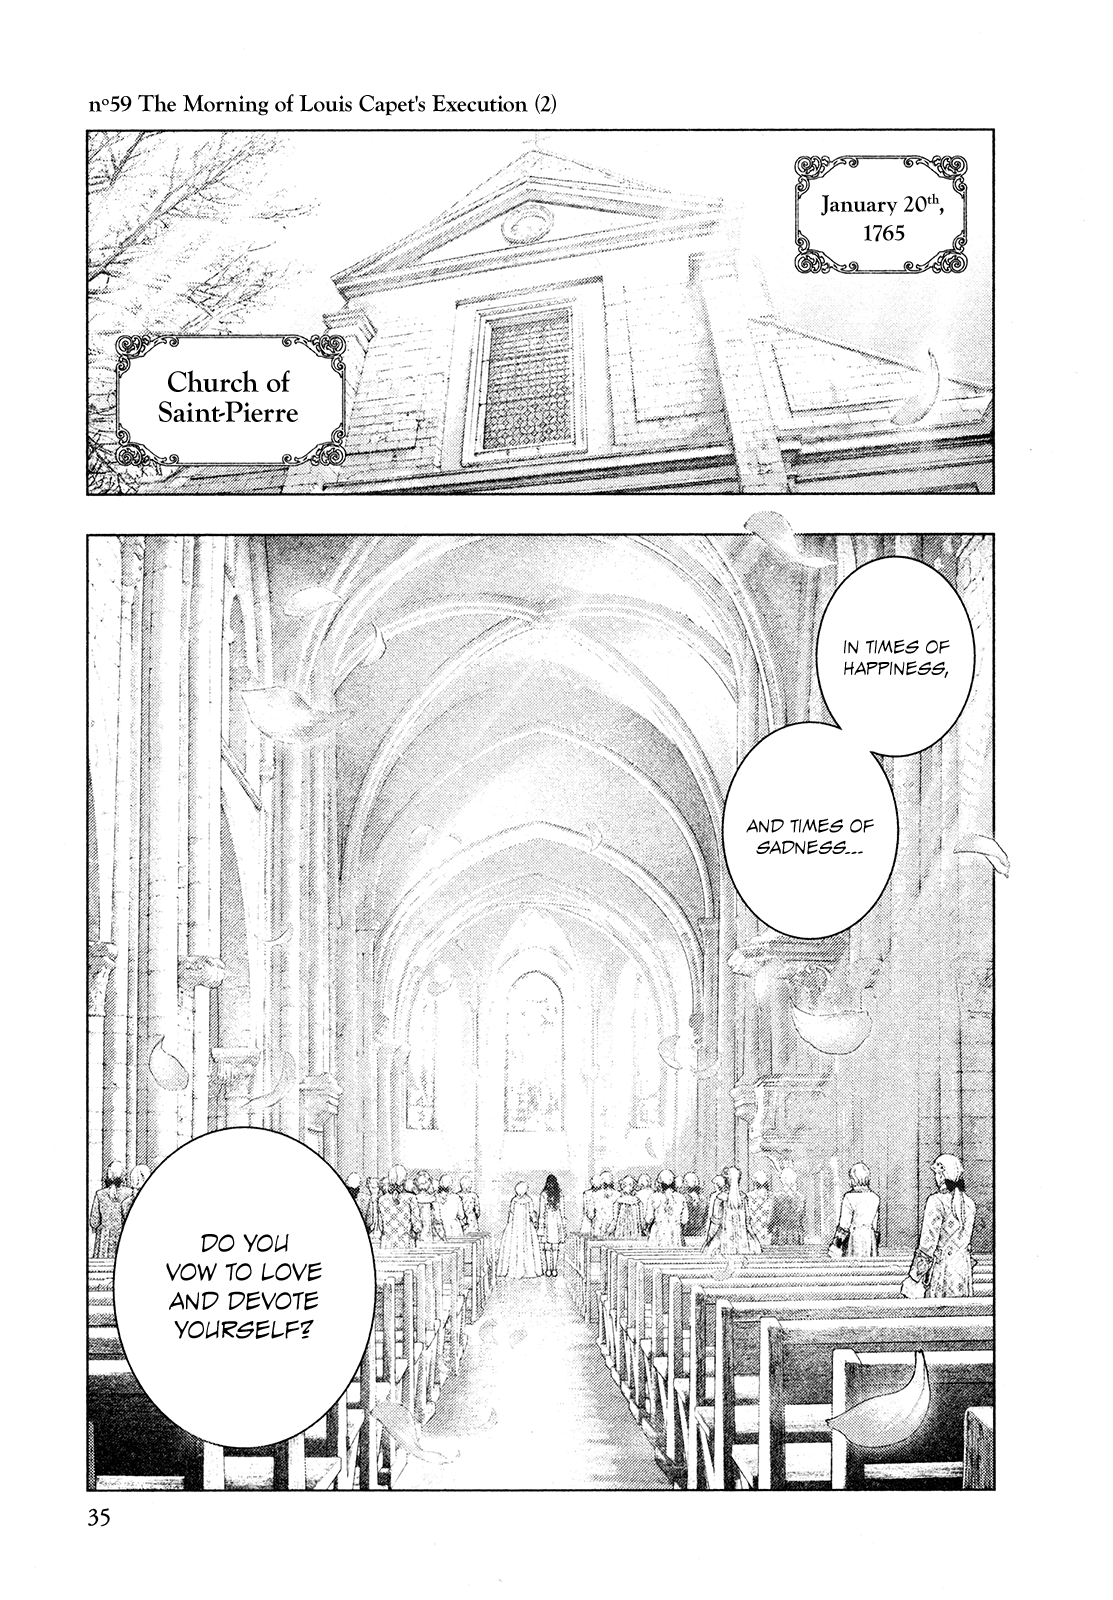 Innocent Rouge Vol.9-Chapter.59-The-Morning-of-Louis-Capet's-Execution-(2) Image